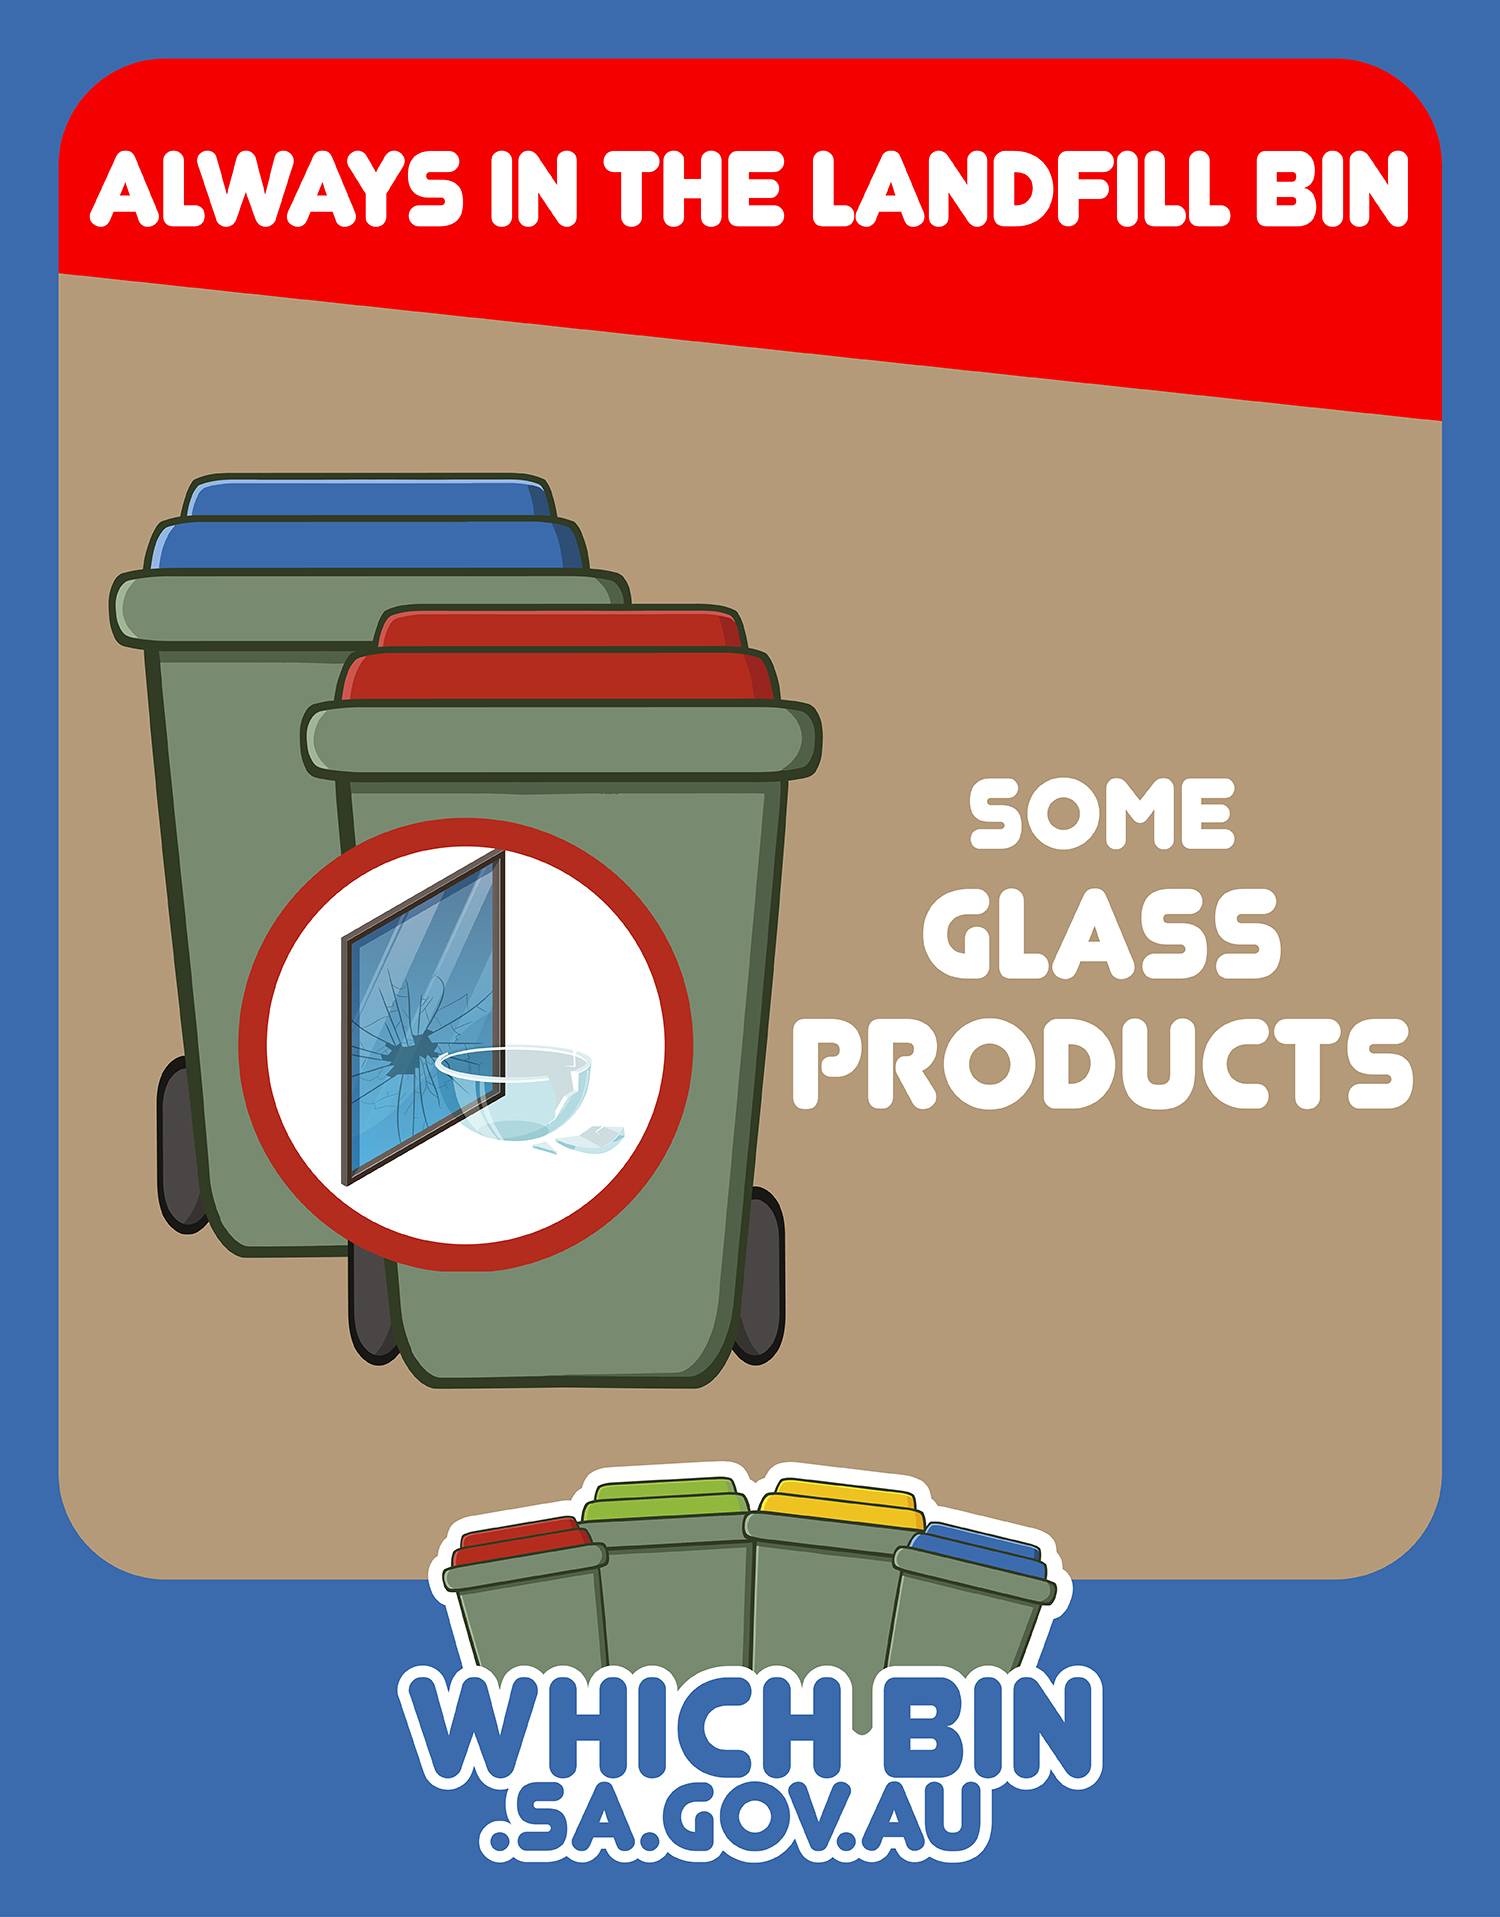 Always in the landfill bin: some glass products 